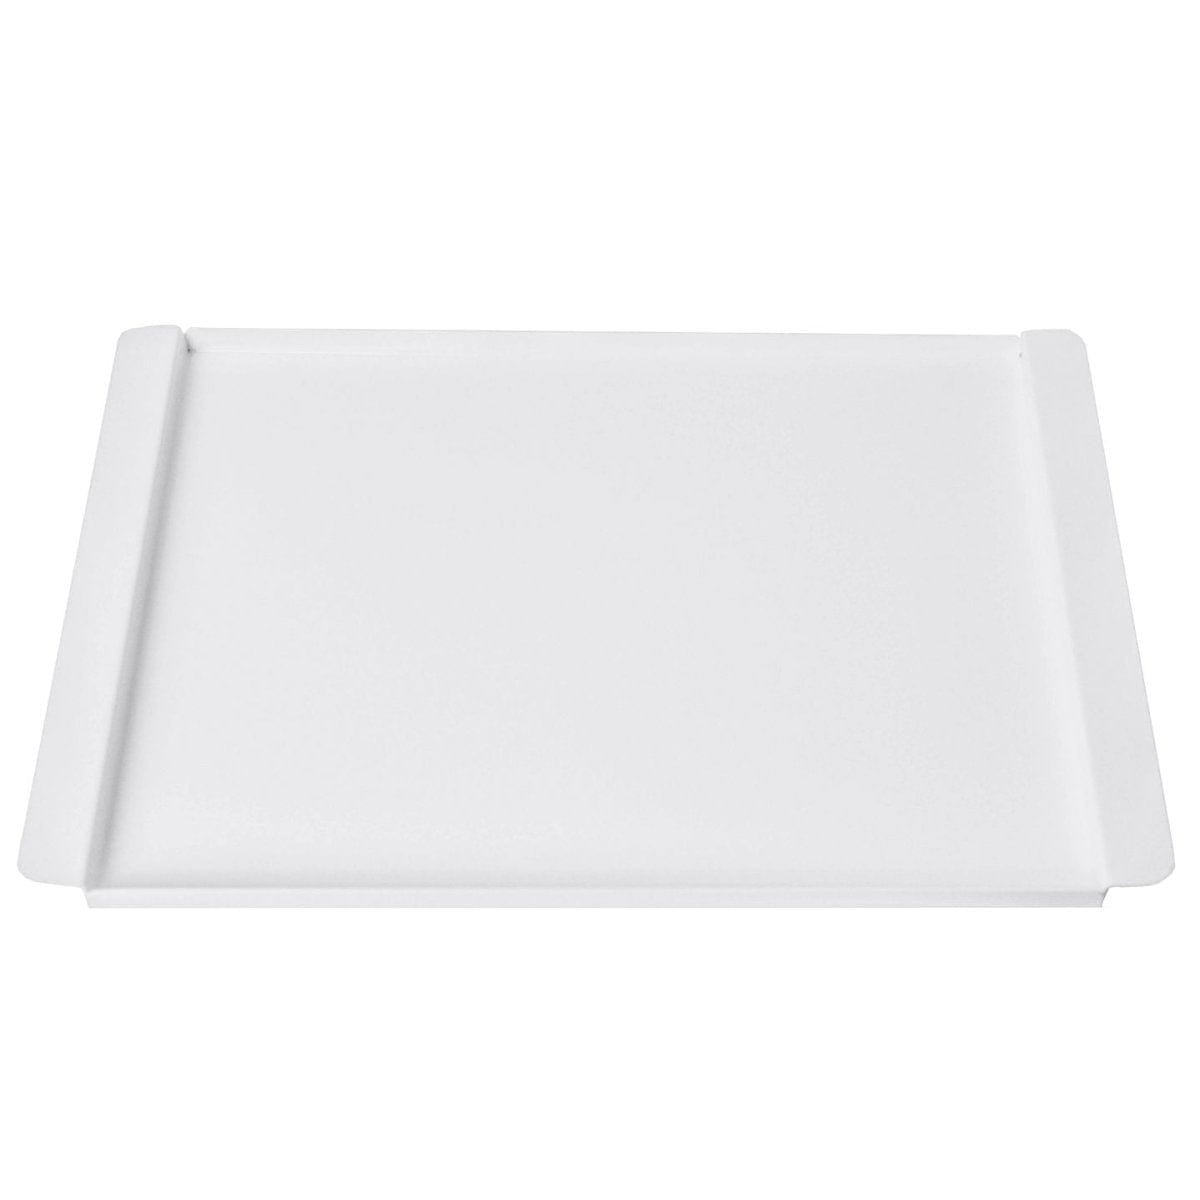 Metal Tray // 45% Discount